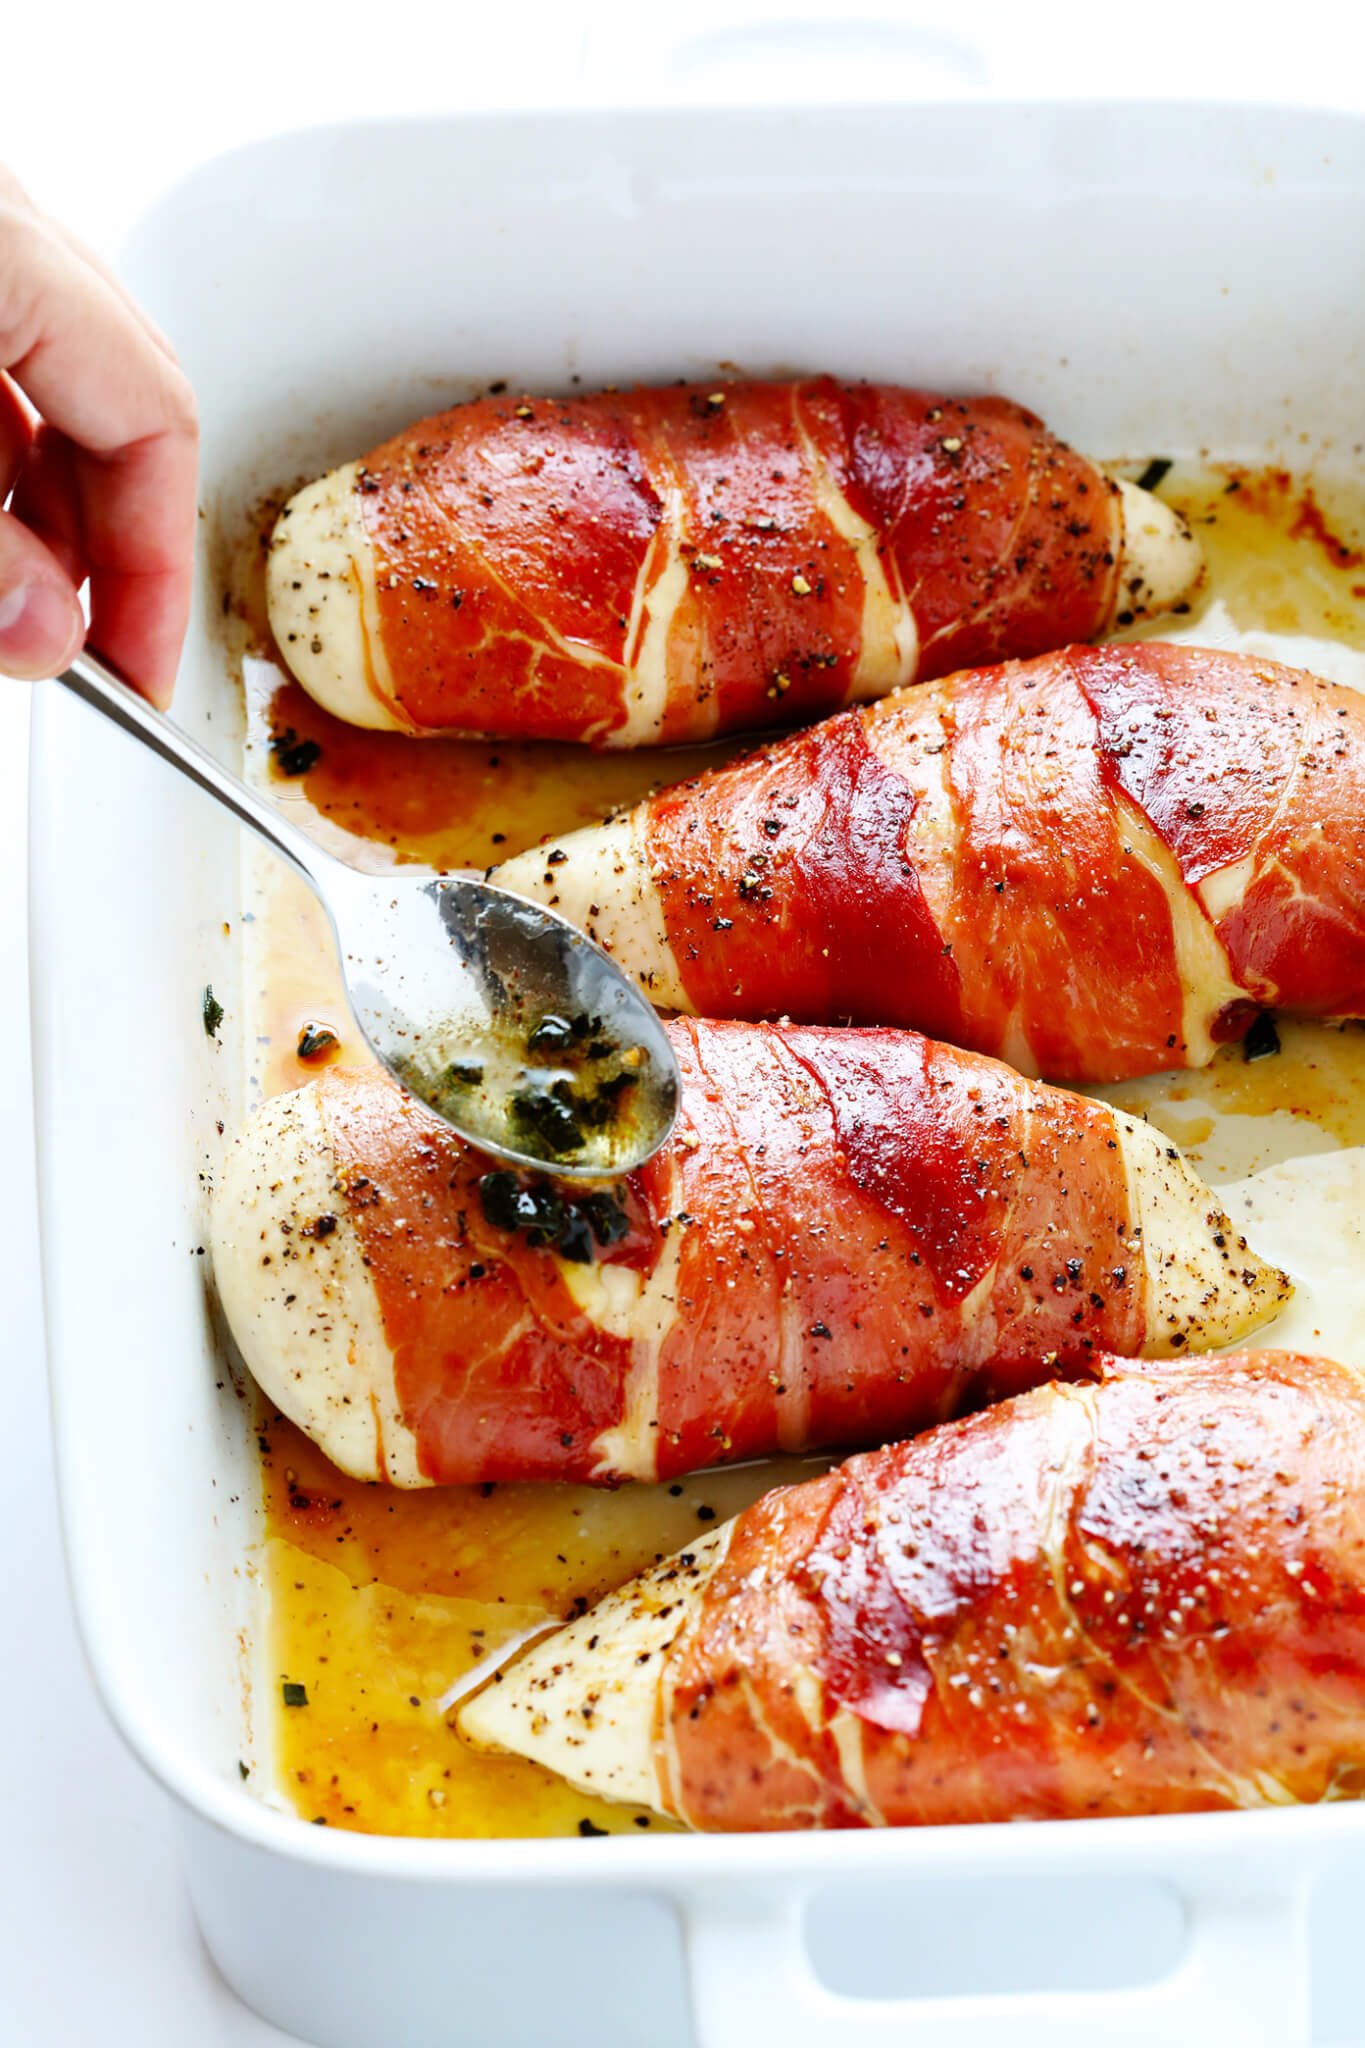 LOVE Prosciutto-Wrapped Baked Chicken recipe. It's an easier version of traditional Italian Saltimbocca, and tastes absolutely delicious! | gimmesomeoven.com (Gluten-Free)